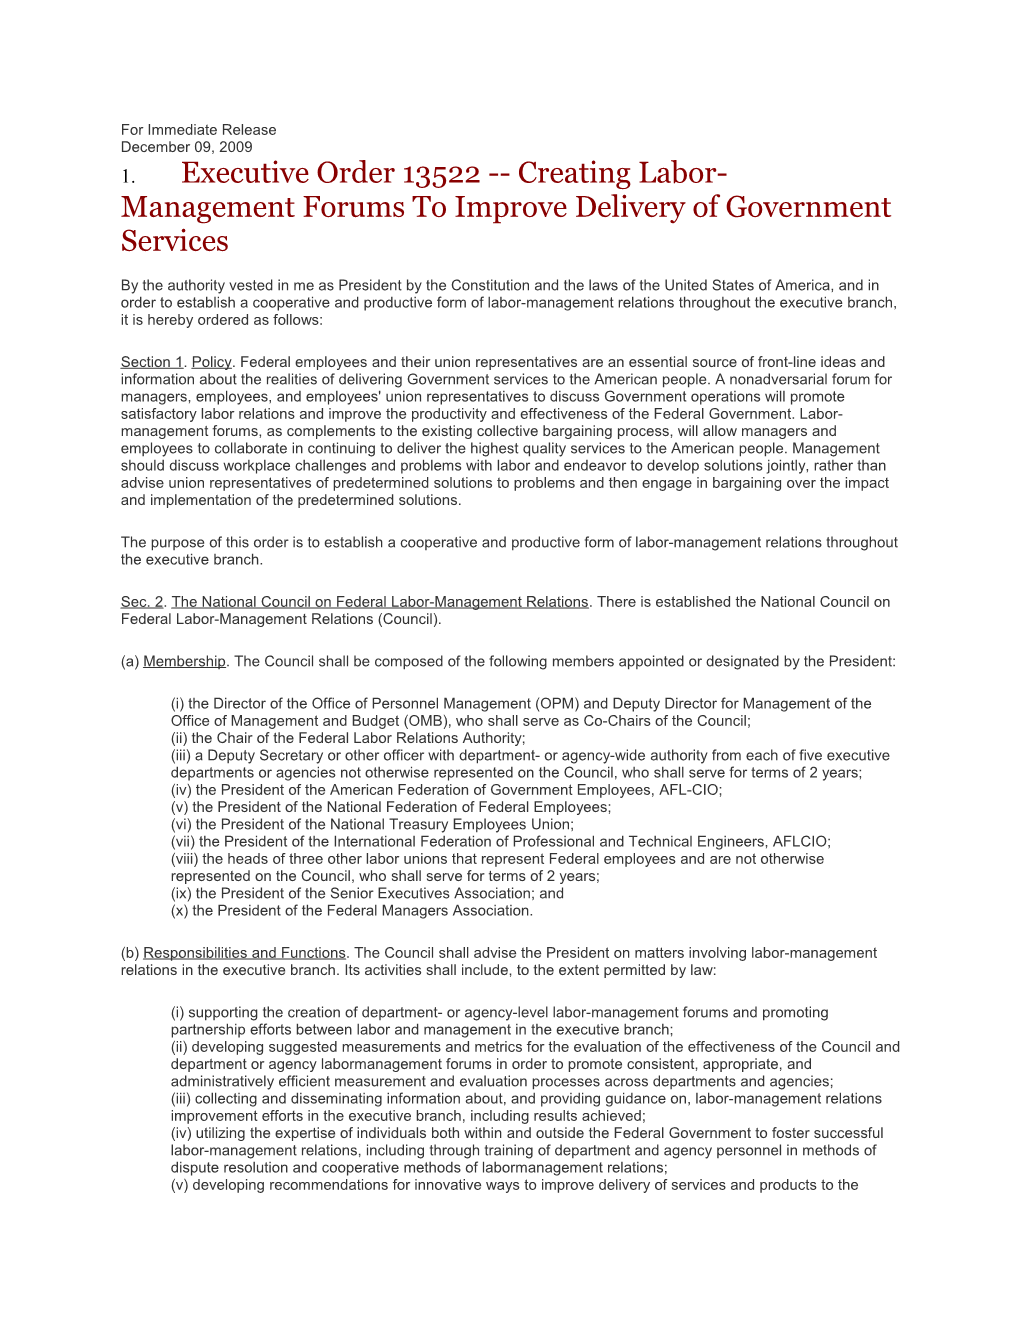 1.Executive Order 13522 Creating Labor-Management Forums to Improve Delivery of Government